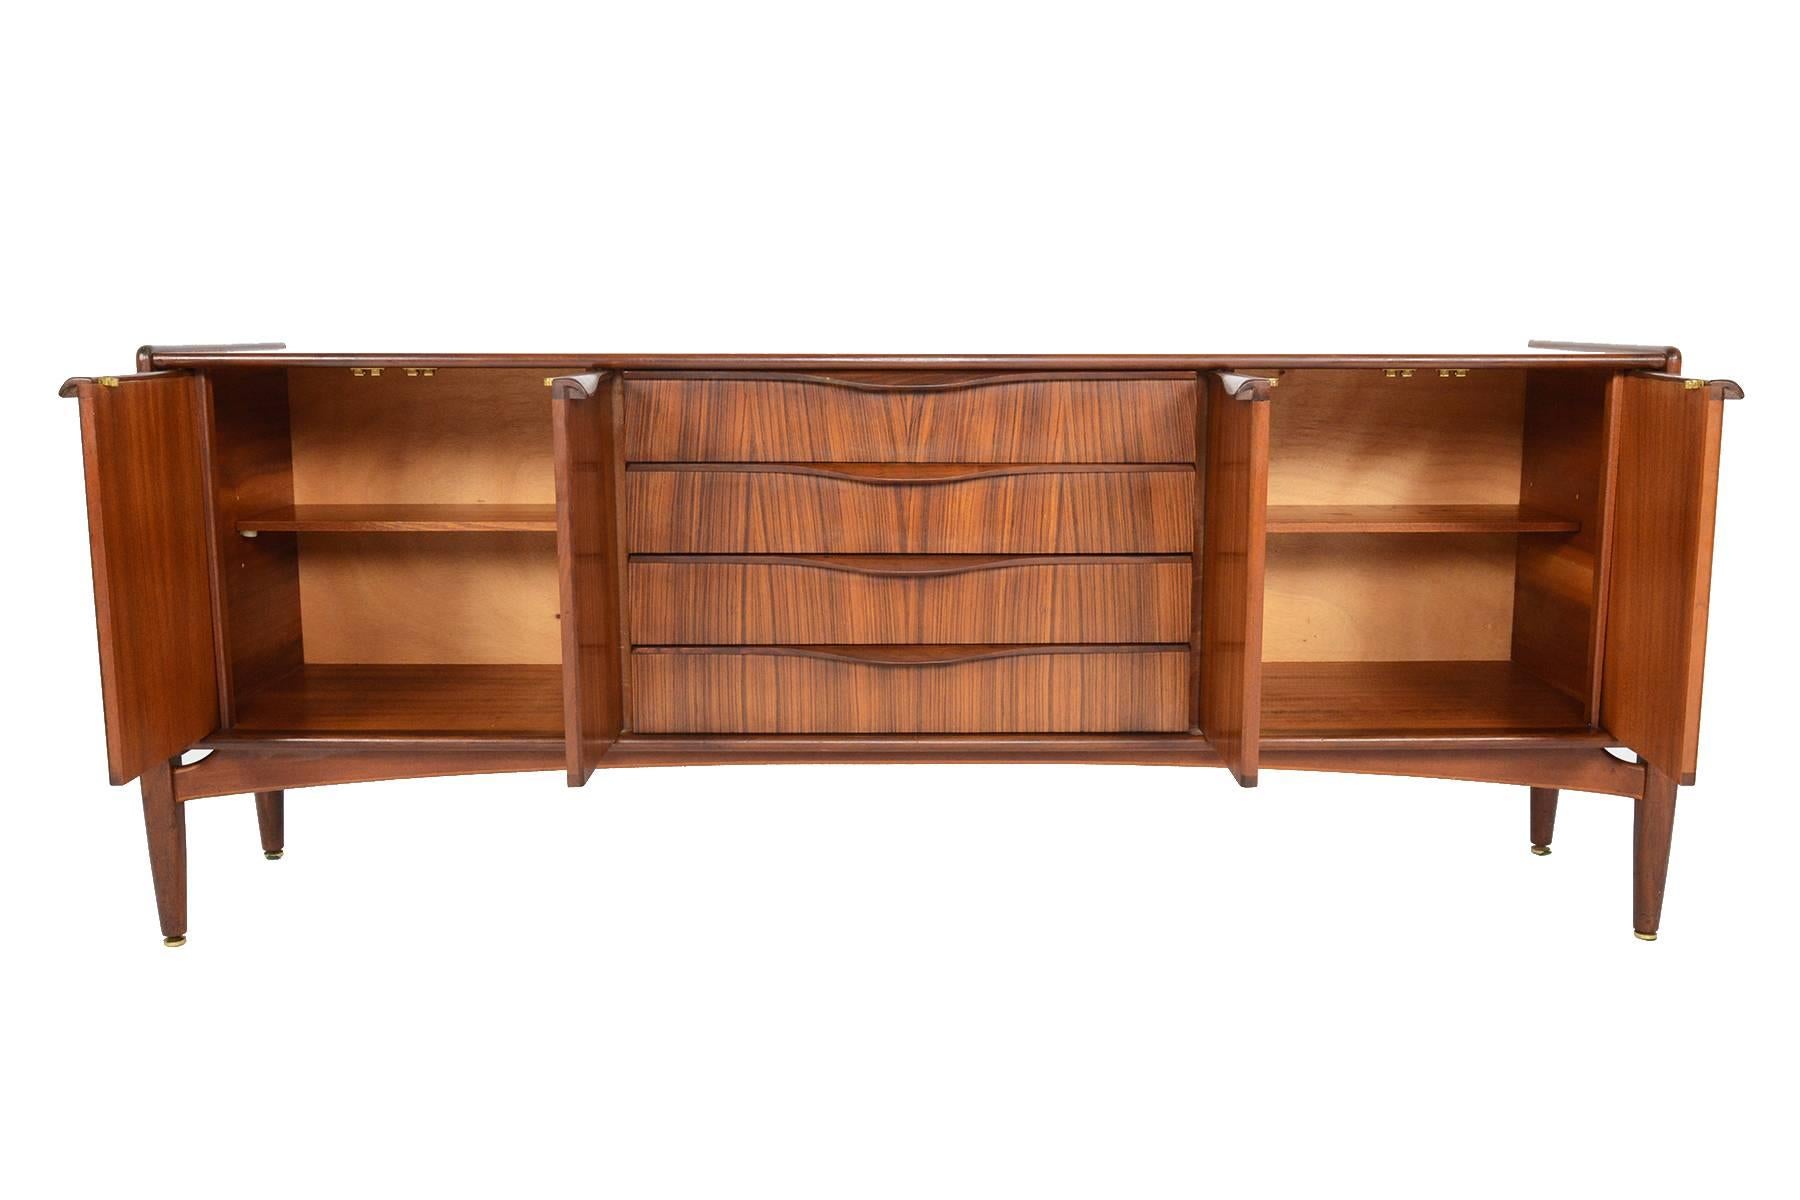 This English modern Mid-Century credenza in mahogany and tola was manufactured by Elliott's of Newbury in the 1960s. This beautiful piece features a floating base, supported by exterior legs with delicate brass hardware. Either end of this sideboard